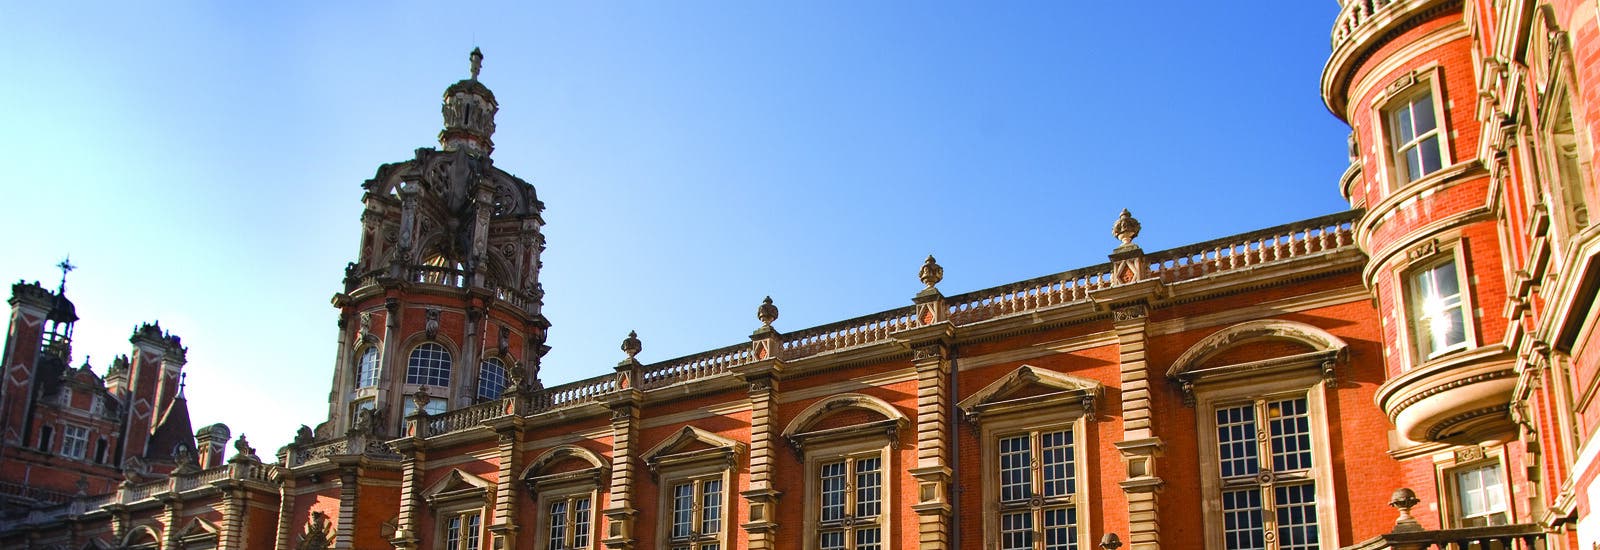 Royal Holloway's Founder's building